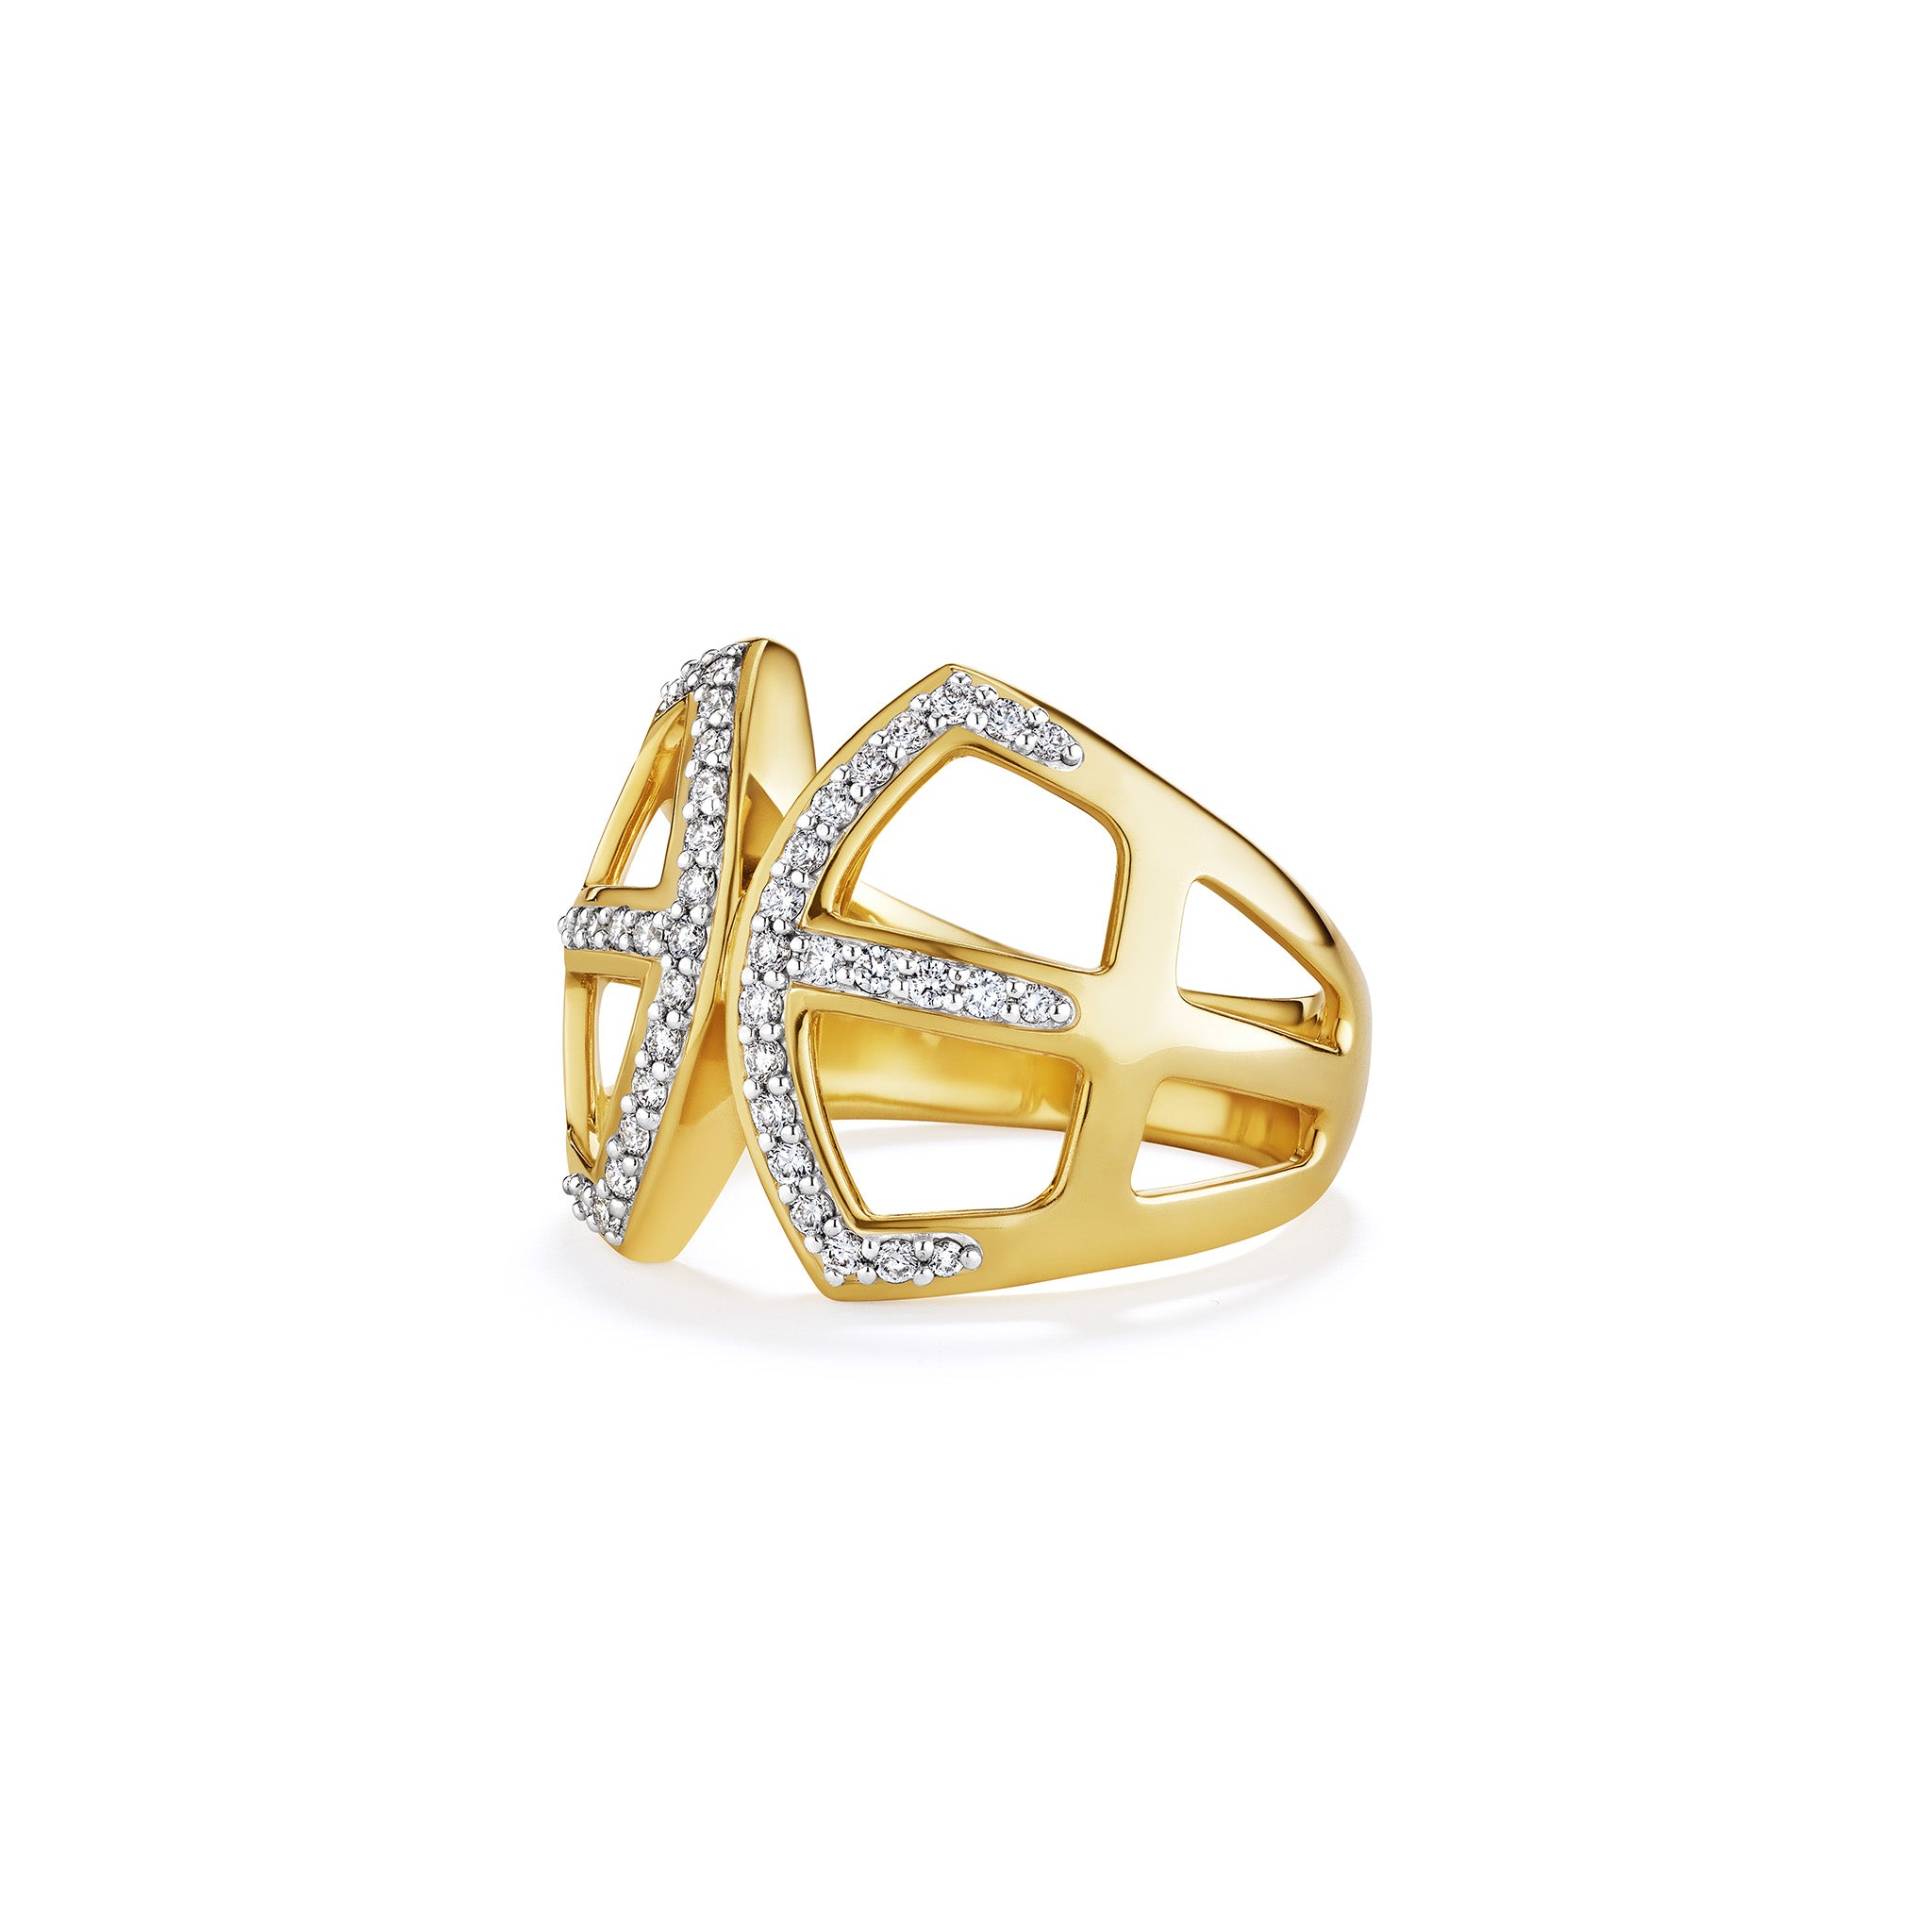 Selvaggia Wide Band Ring with Diamonds in 14K